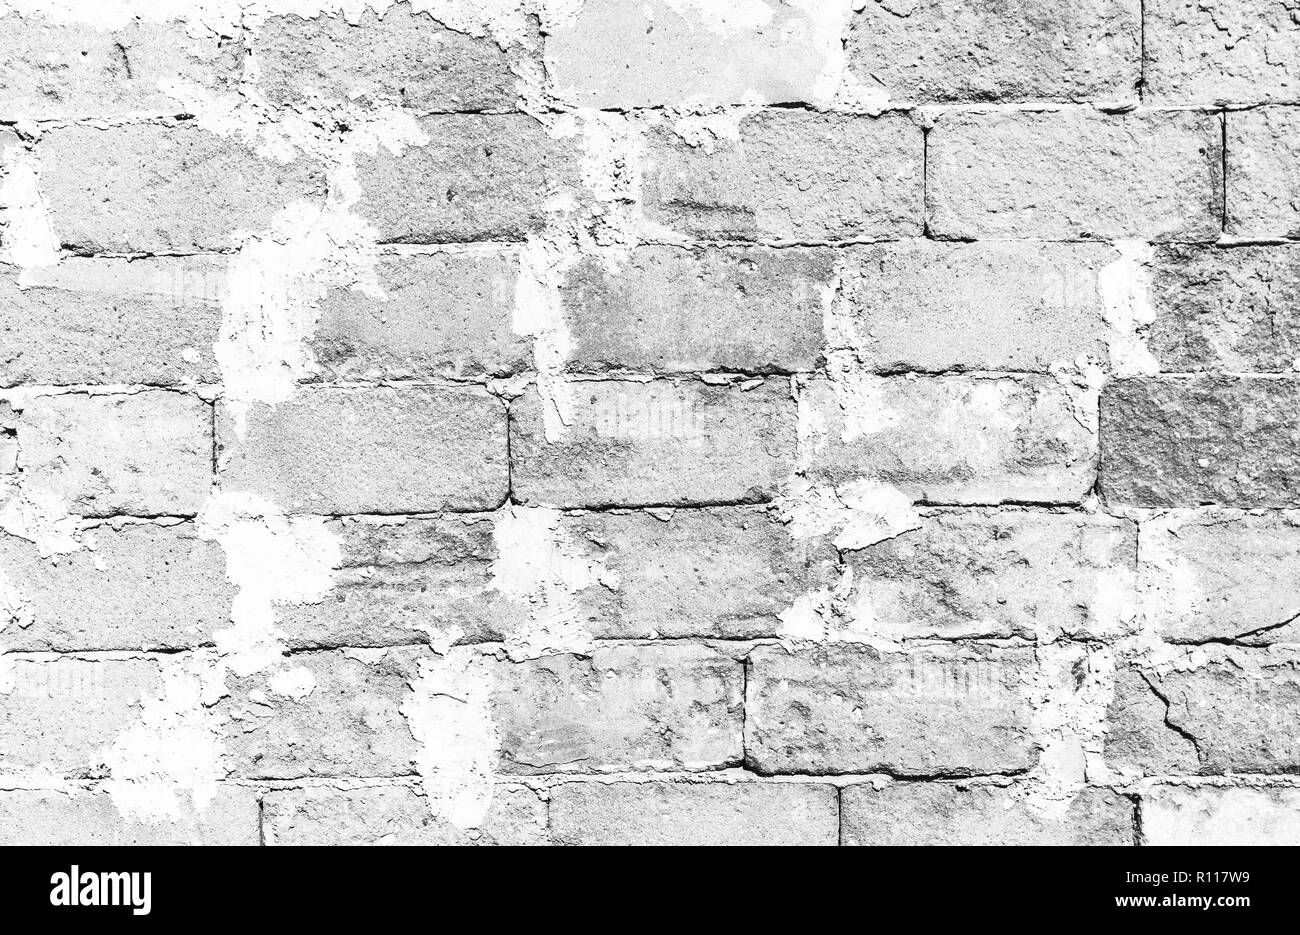 Large block wallpaper Black and White Stock Photos & Images - Alamy